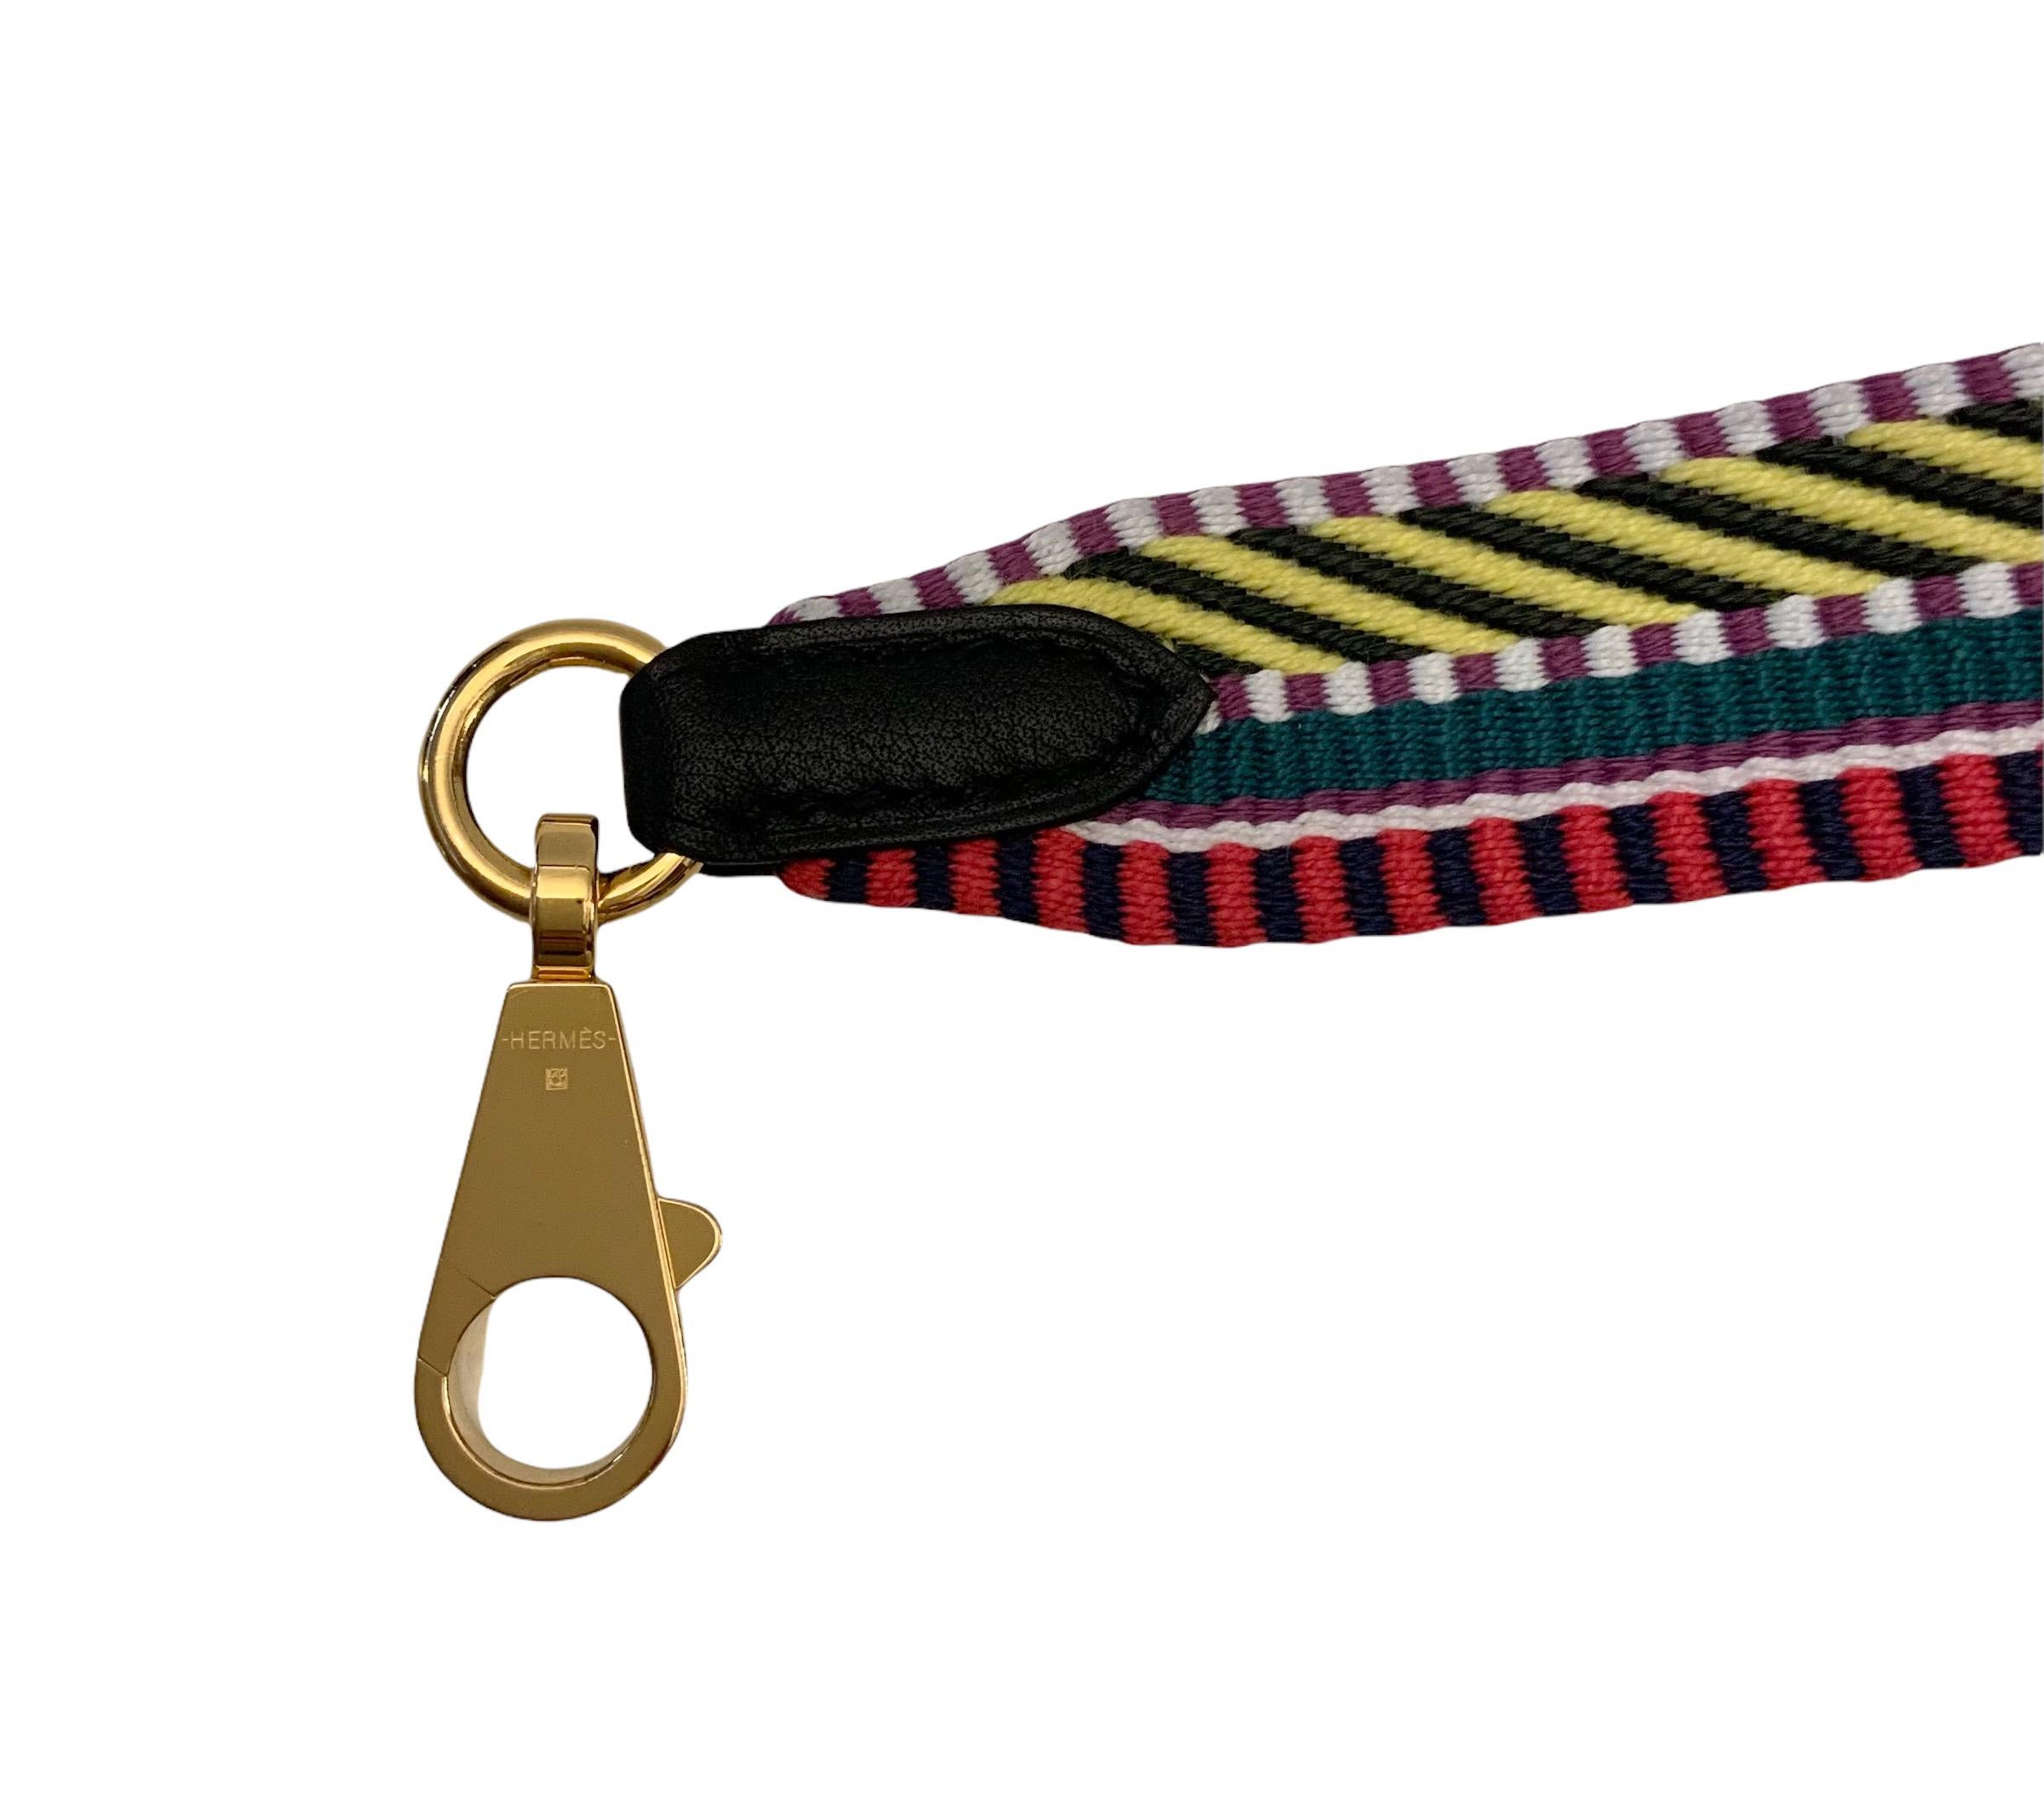 Beautiful long bag strap in multicolor Cavale canvas and black Swift calfskin with goldtone metal hardware and snap hook.

Material: Canvas and Swift Calfskin leather
Hardware: Goldtone metal
Color: multicolor and black
Condition: very good
Comes